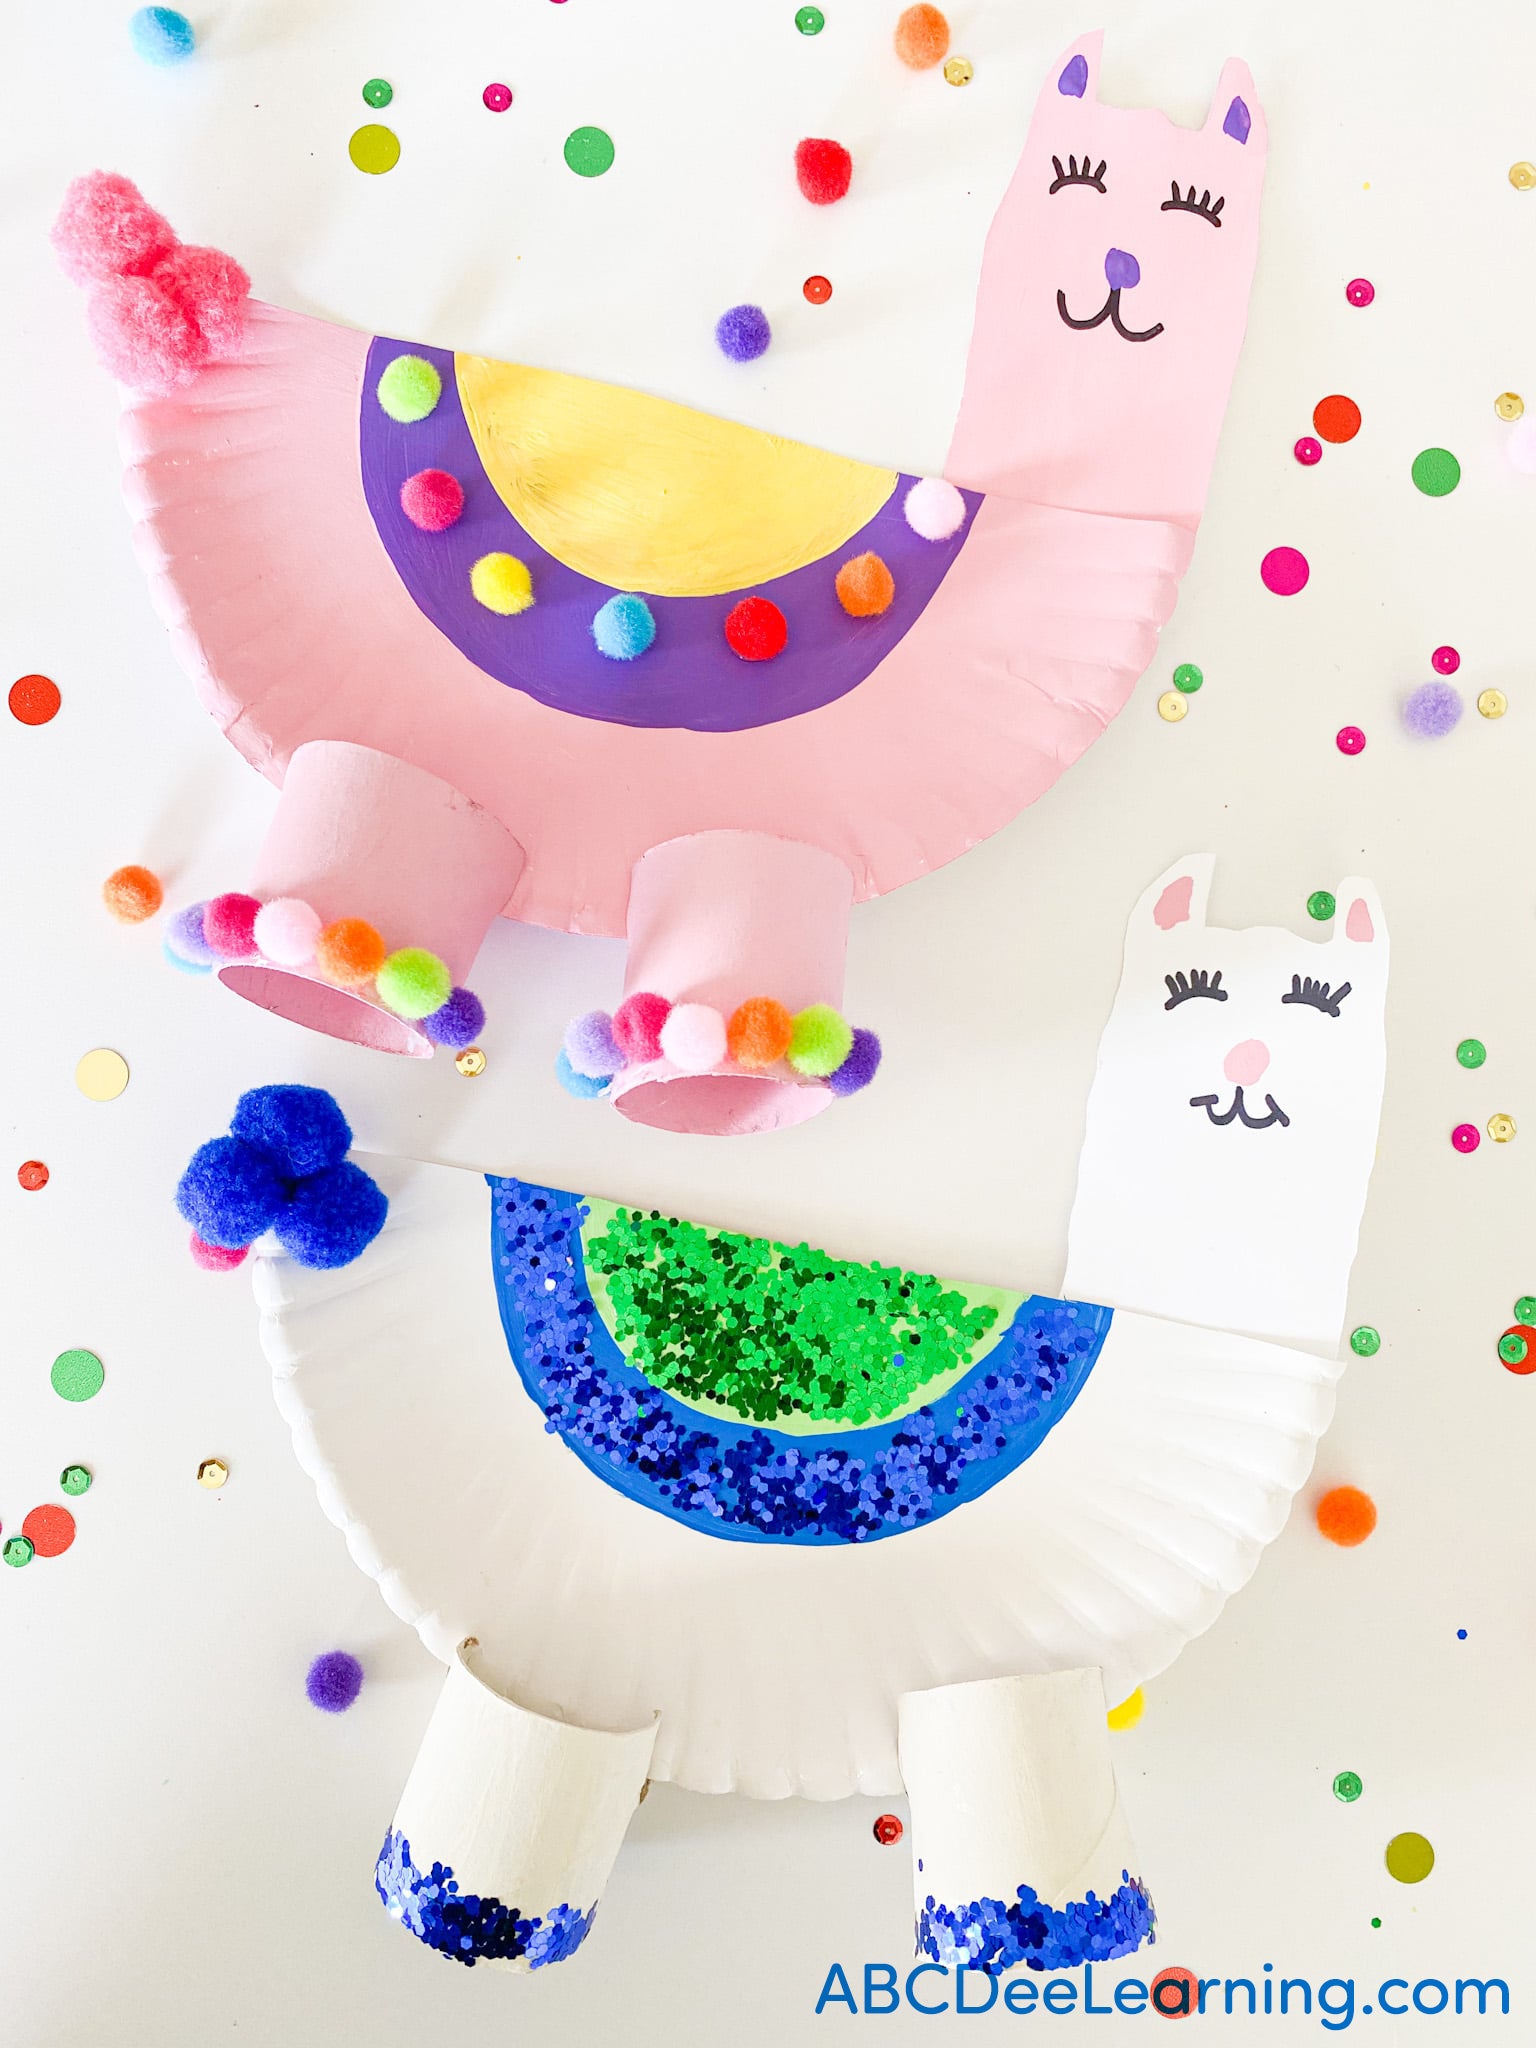 pinwheel crafts all-in-one craft kits for boys and girls arts and crafts for kids easy diy projects cute llama creativity using simple supplies and paper plate art